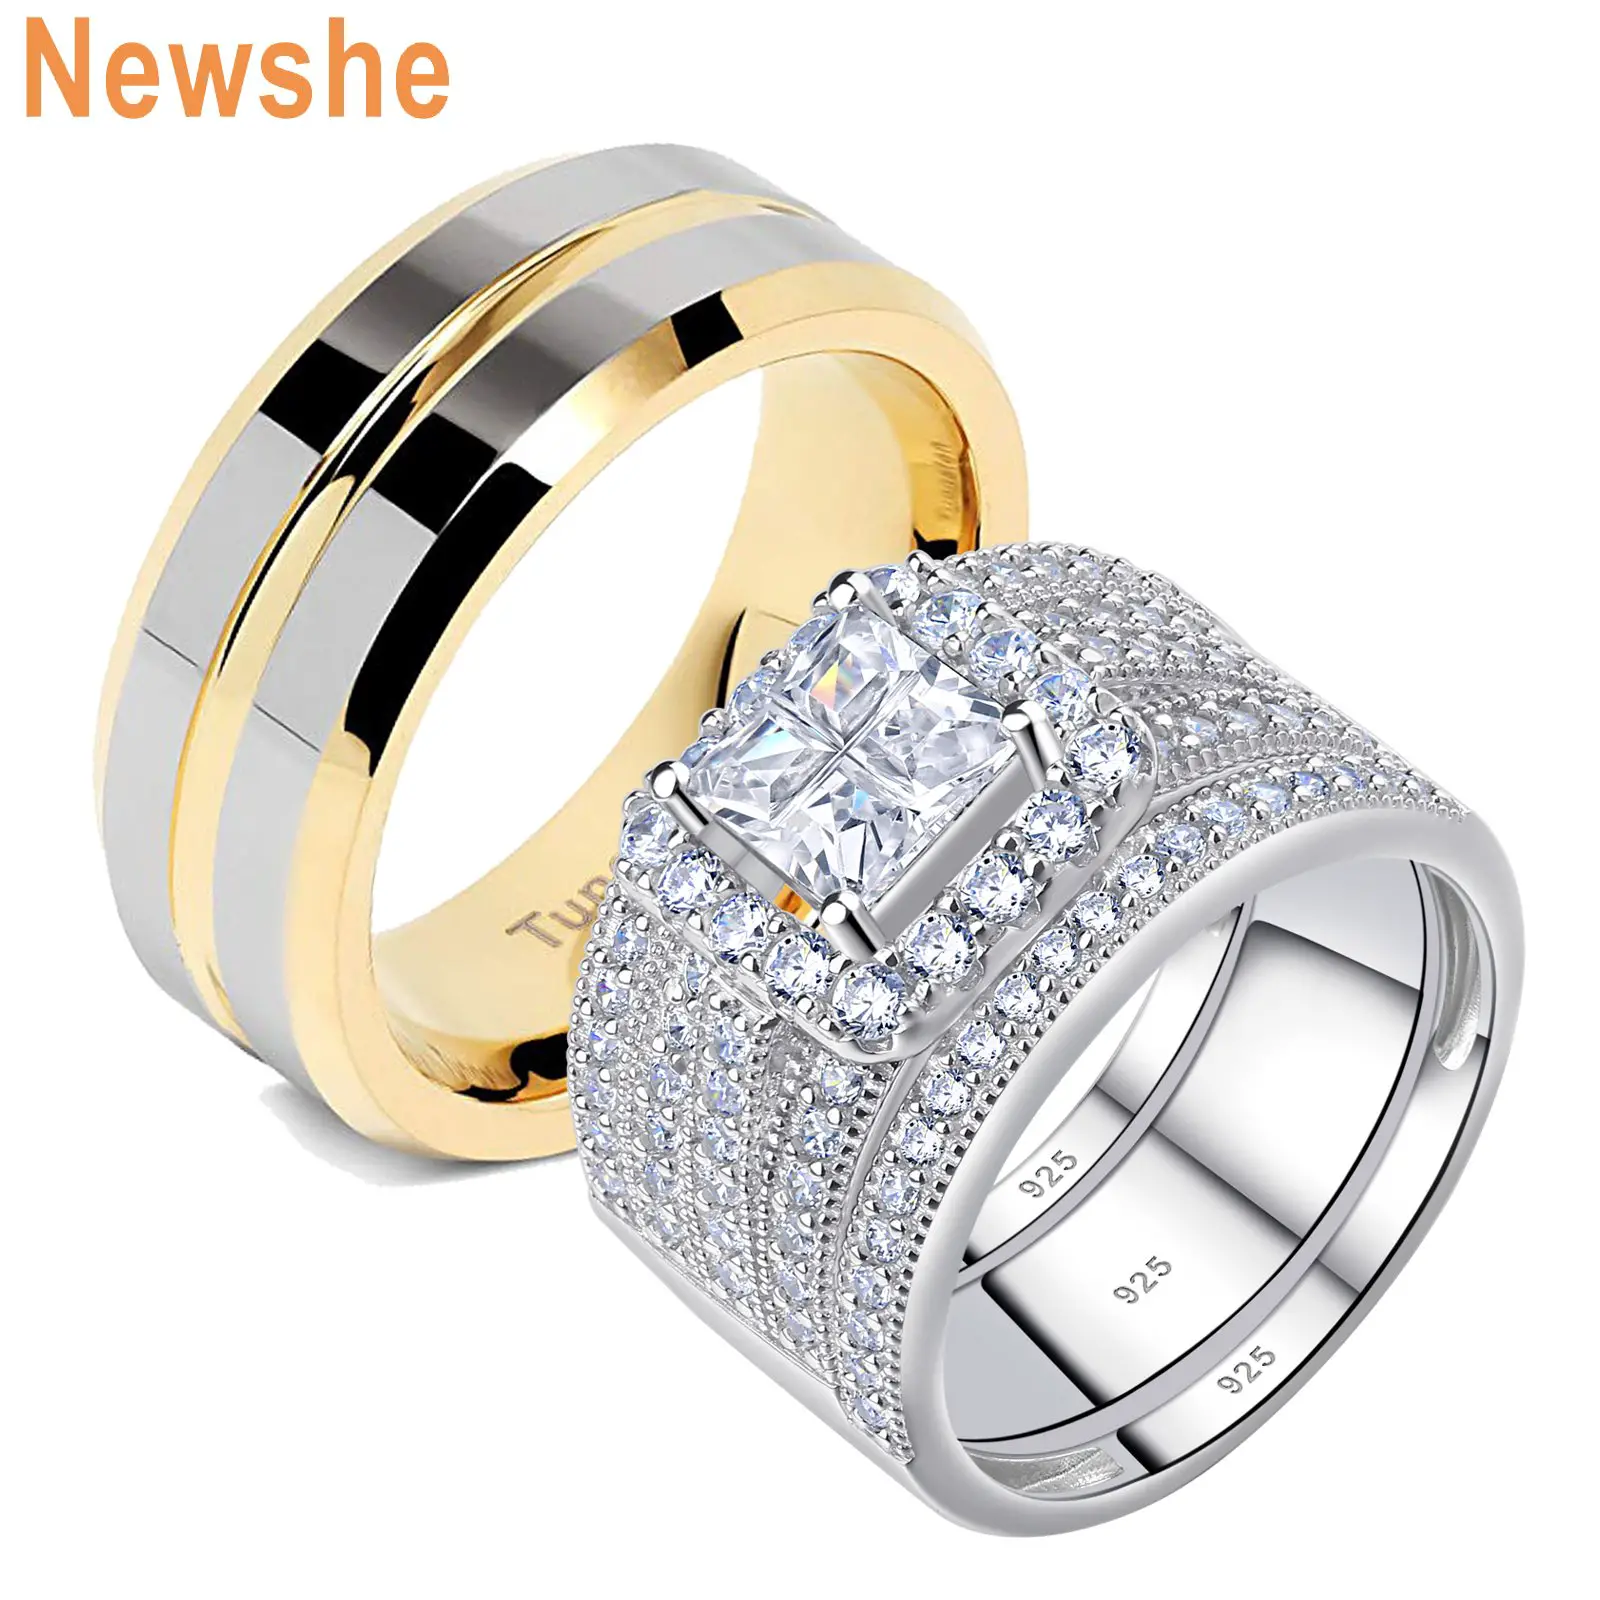 Newshe Wedding Ring Sets For Him and Her Women Men Tungsten Bands Cz ...